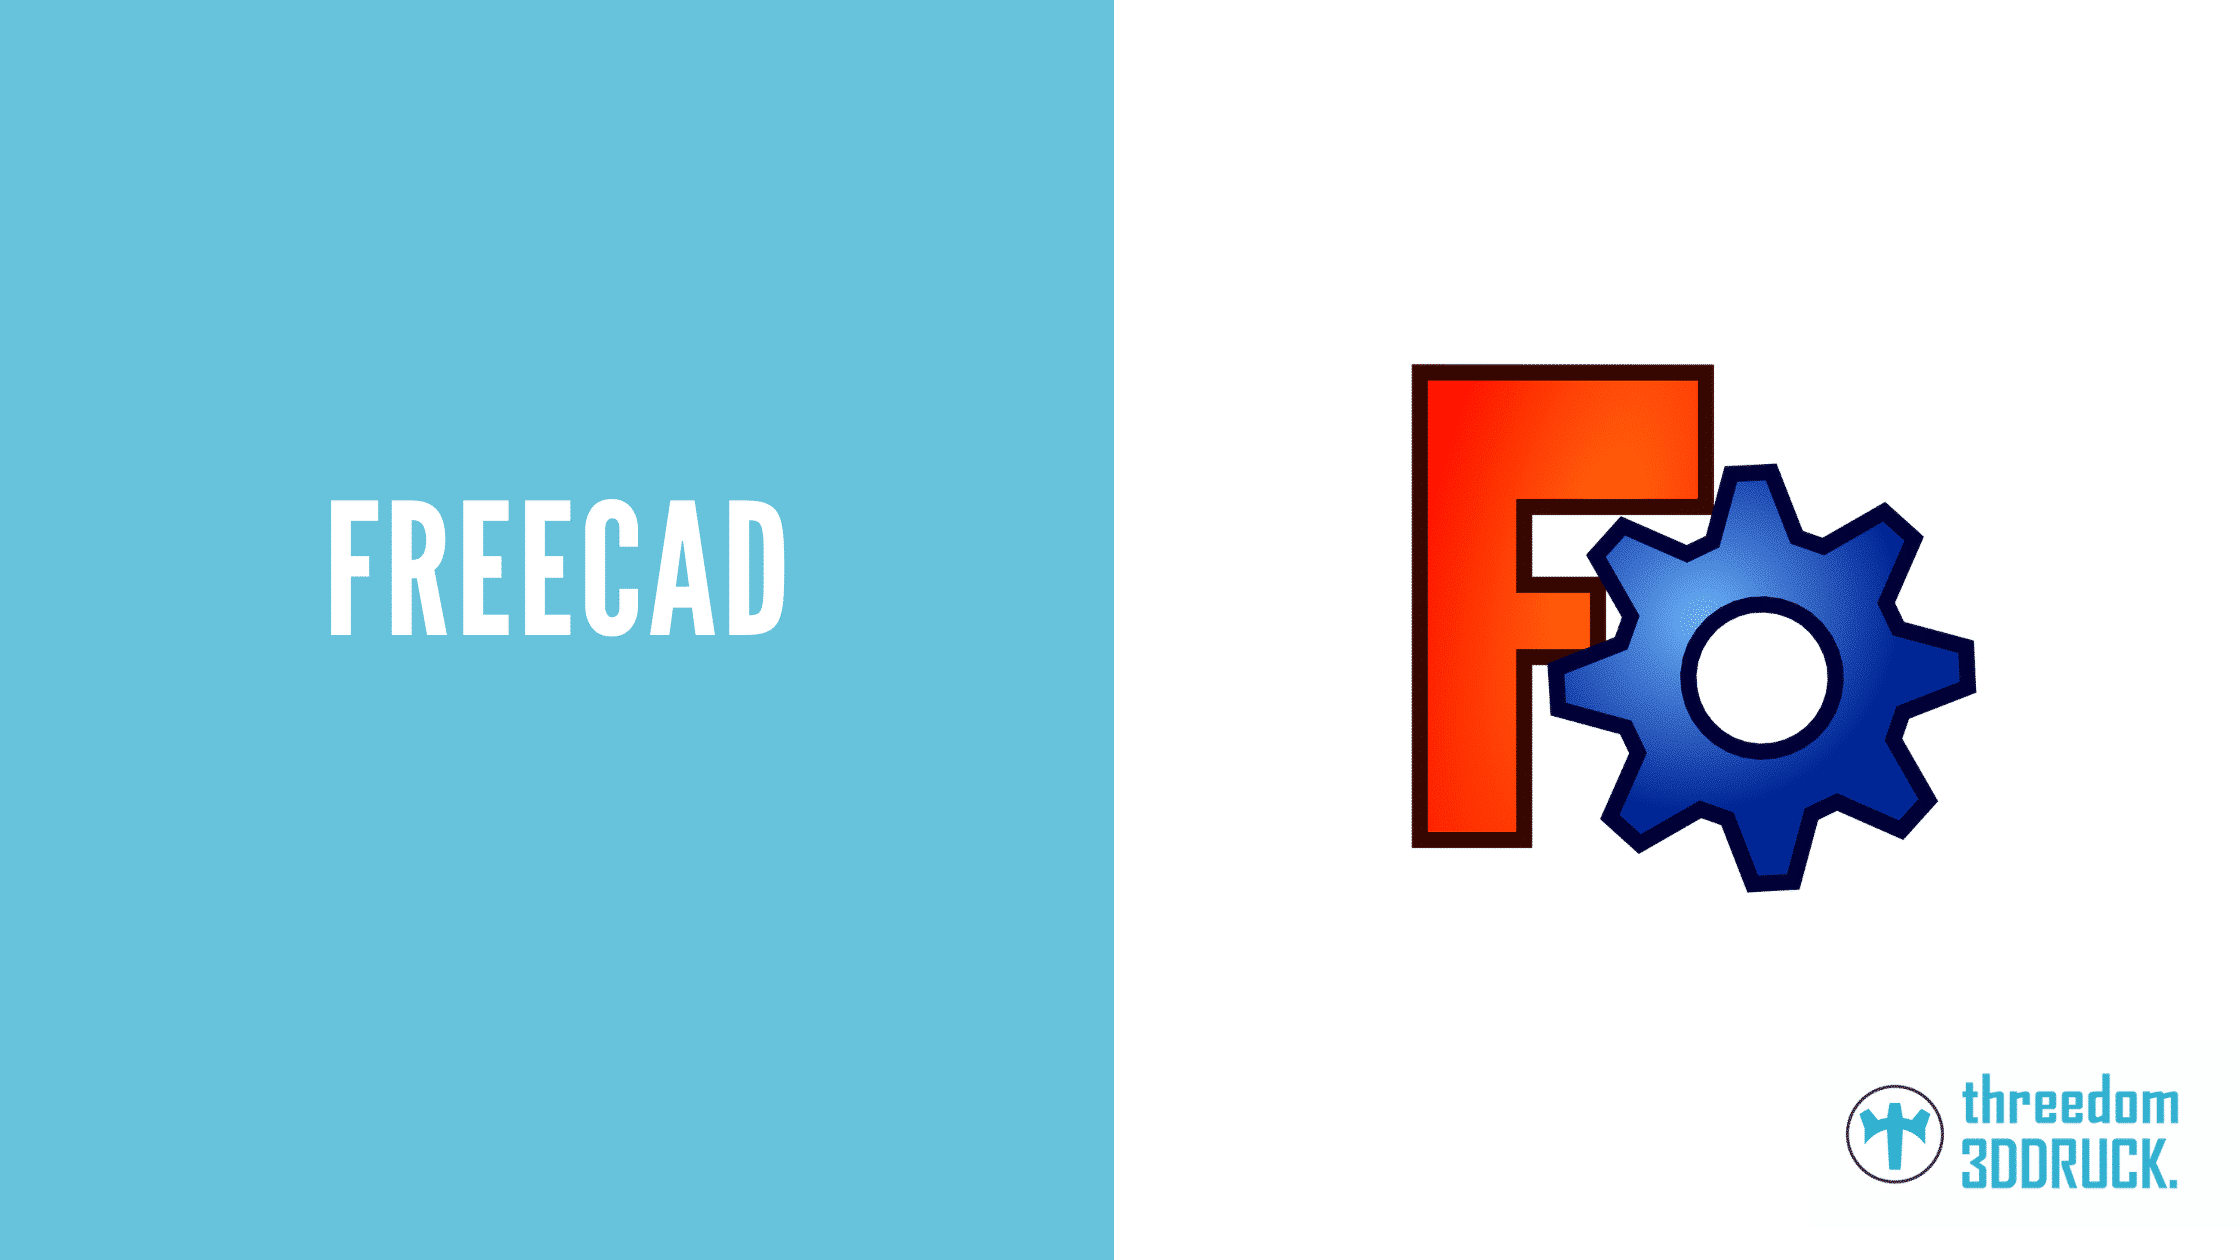 FreeCAD: definition, functionality and scope